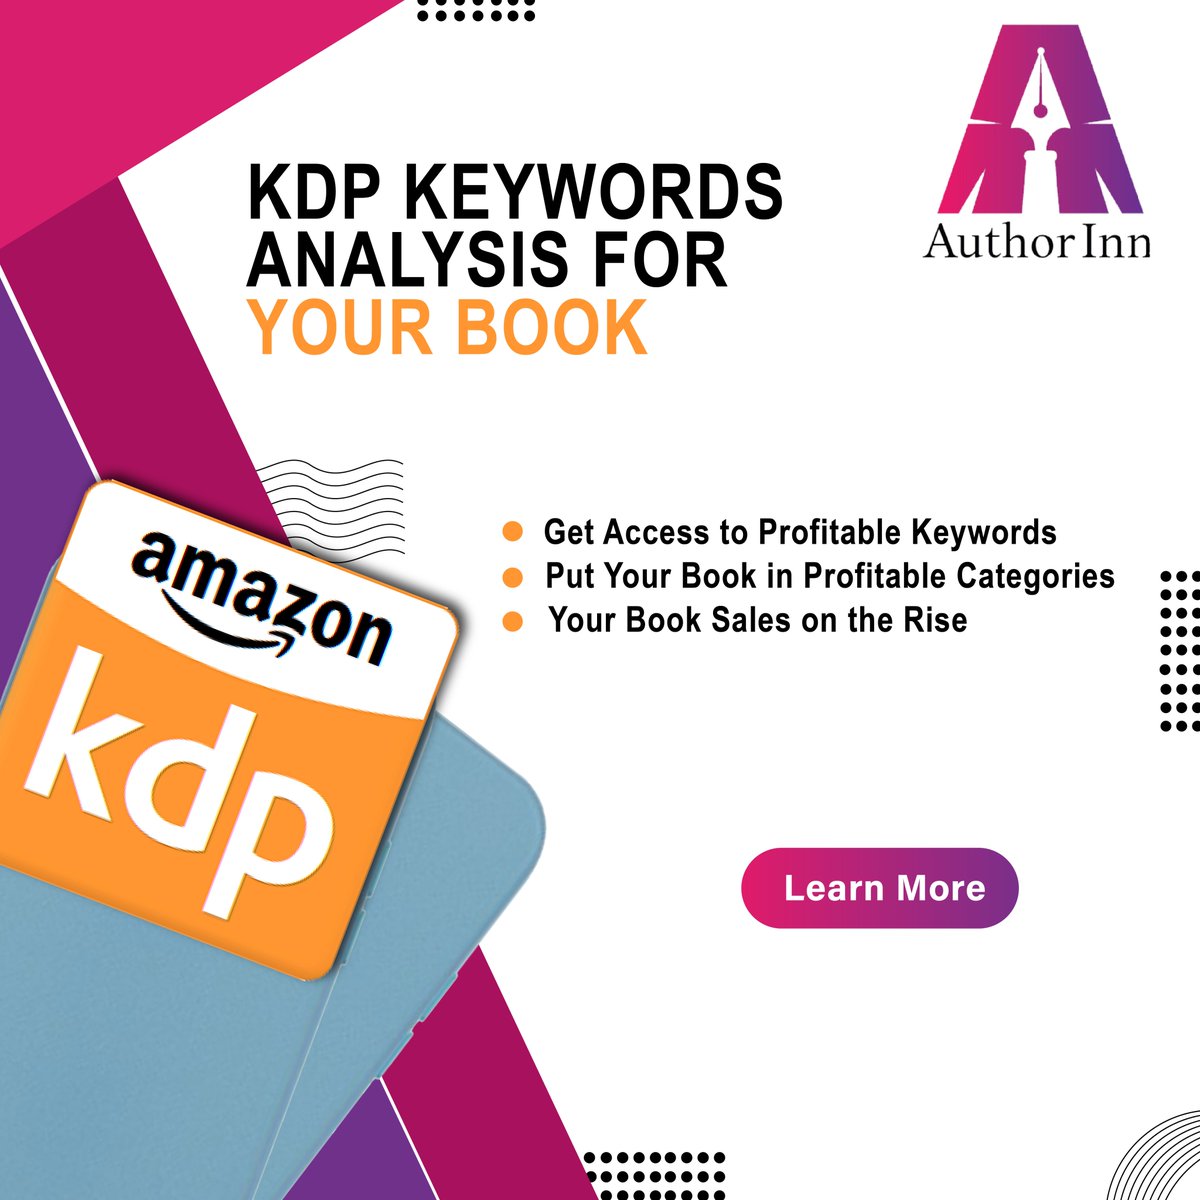 Author Inn offers a selection of professional Search Engine Optimization Services for authors, including content creation and much more.
-
-
-
-
-
#BookSEO #BookRanking #KeywordsforBook #KdpKeywords #EbookAmazonRanking #Authorinn